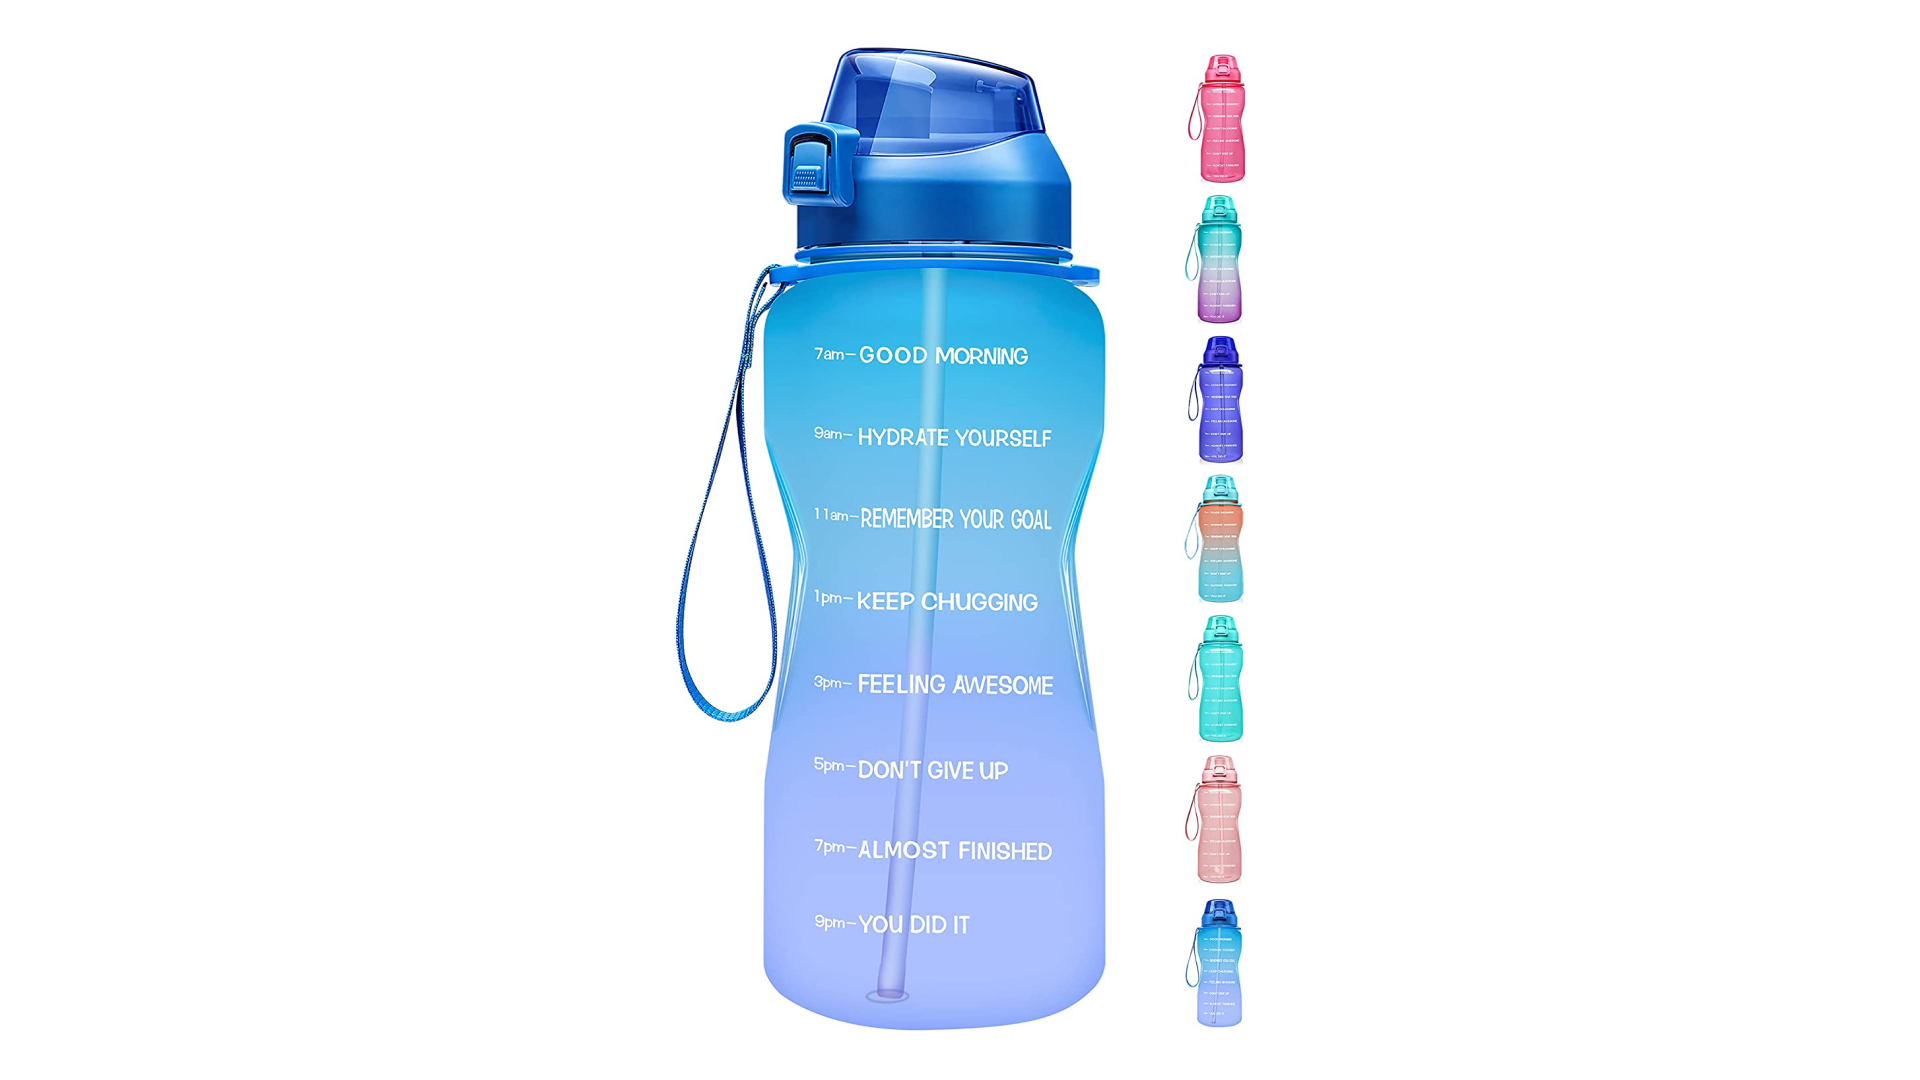 A half-gallon, time-marker water bottle so you can fuel up…